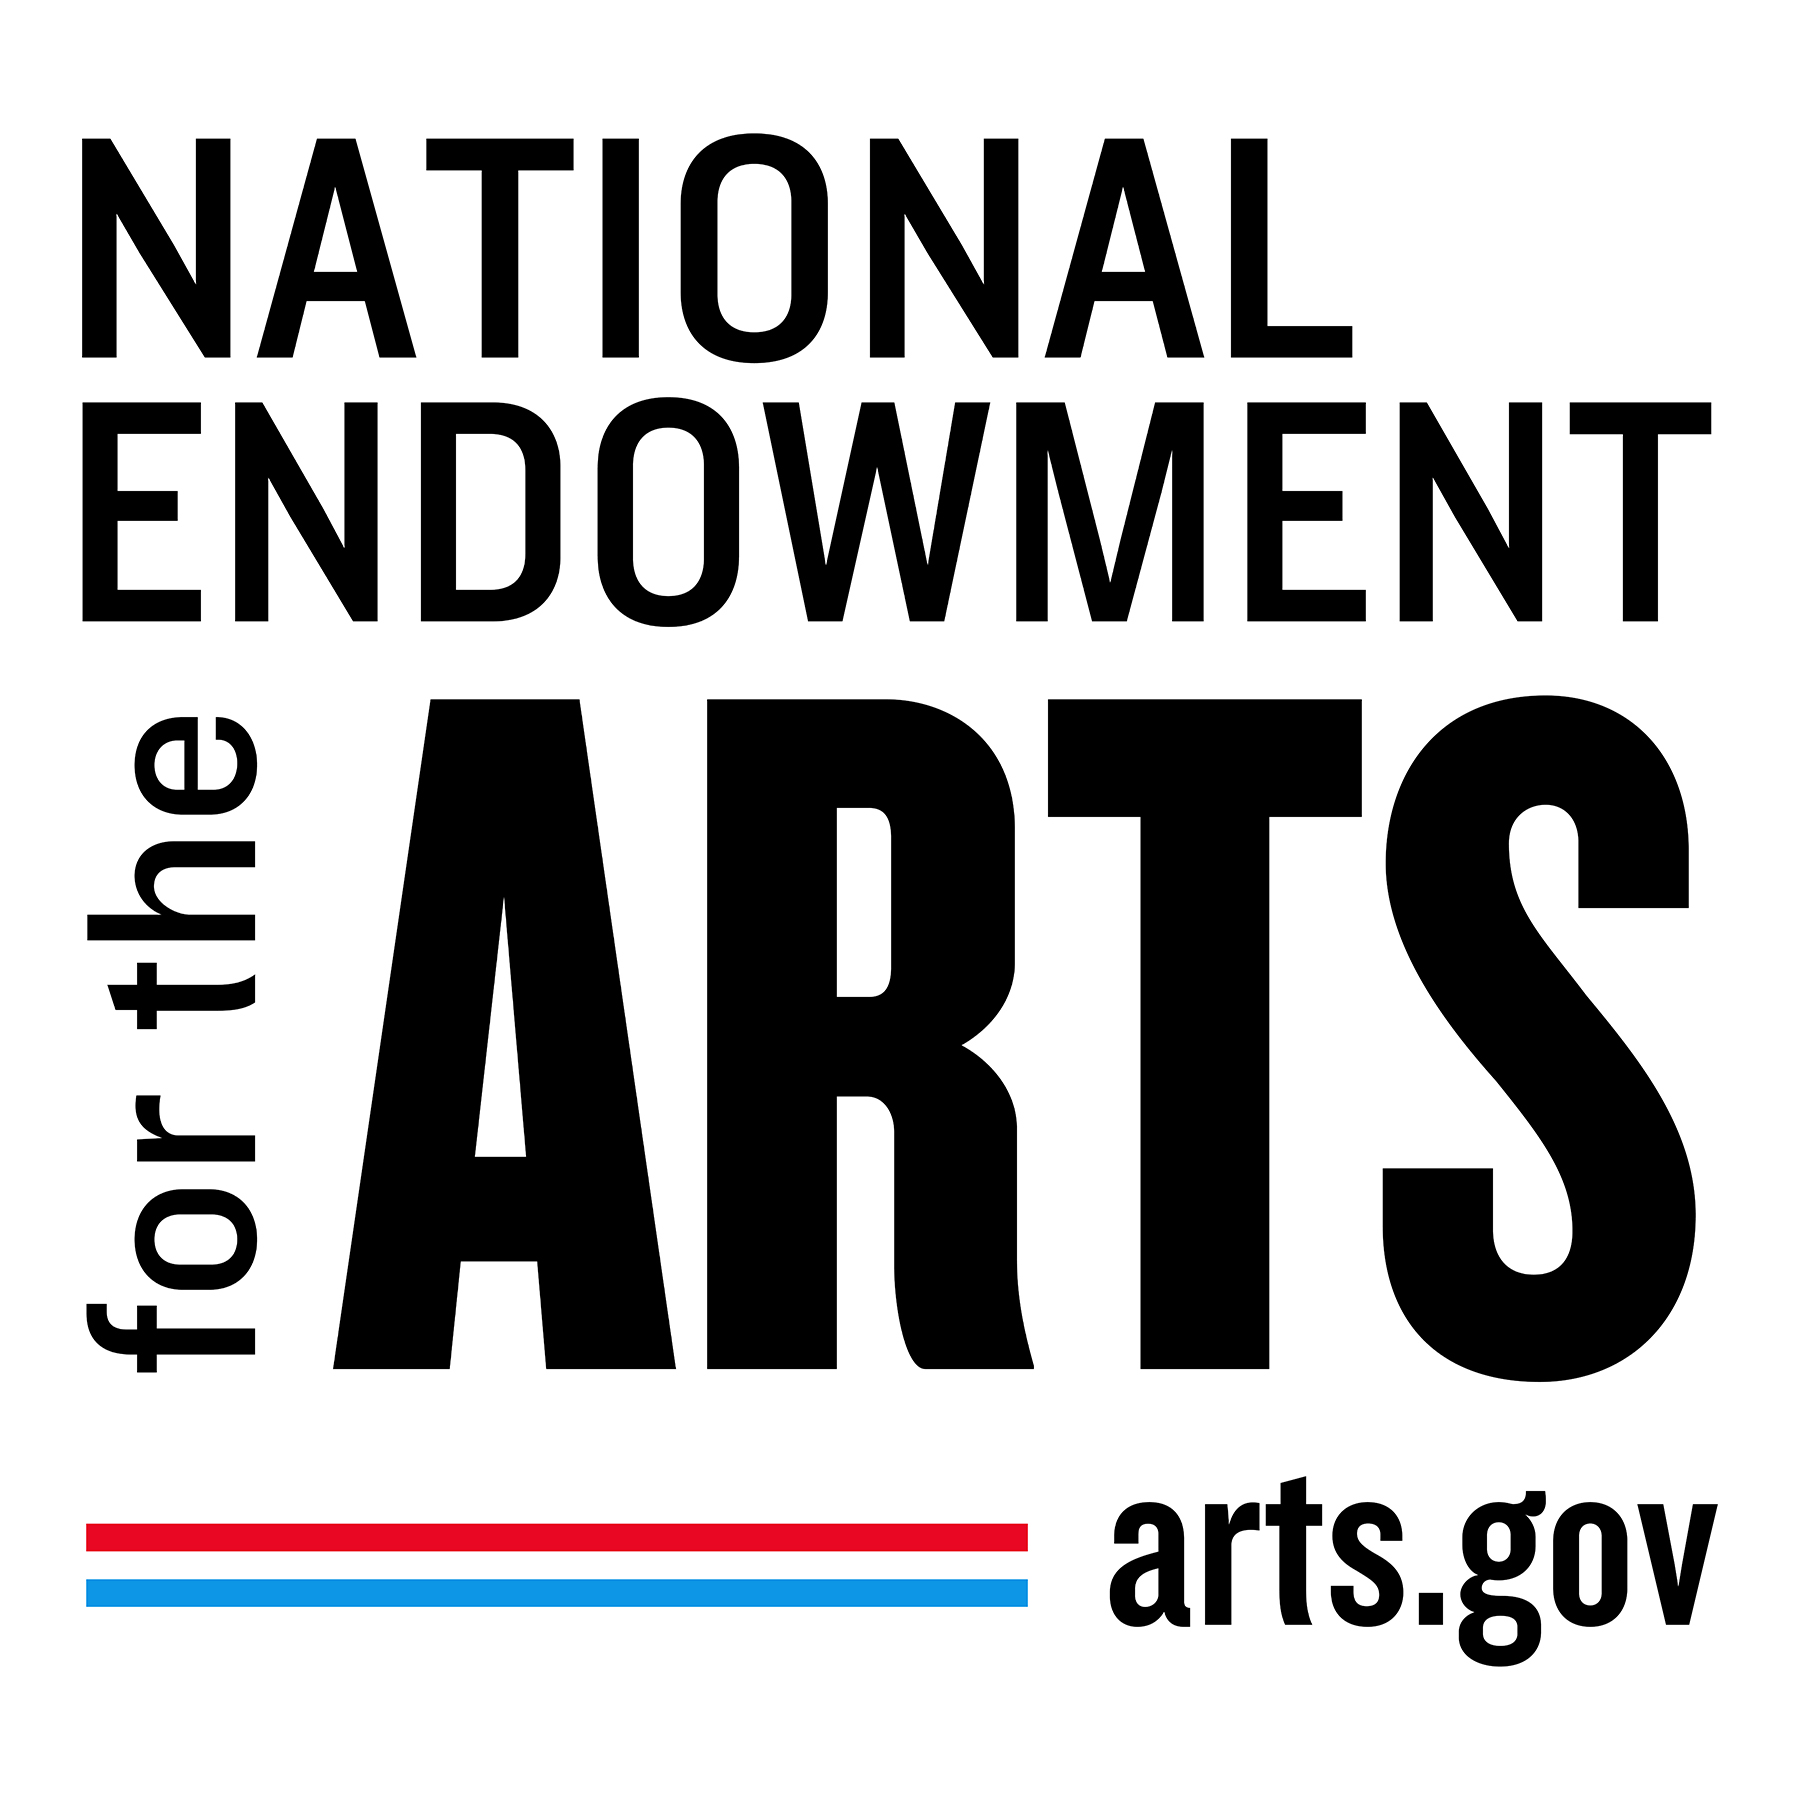 National Endowment for the Arts home page